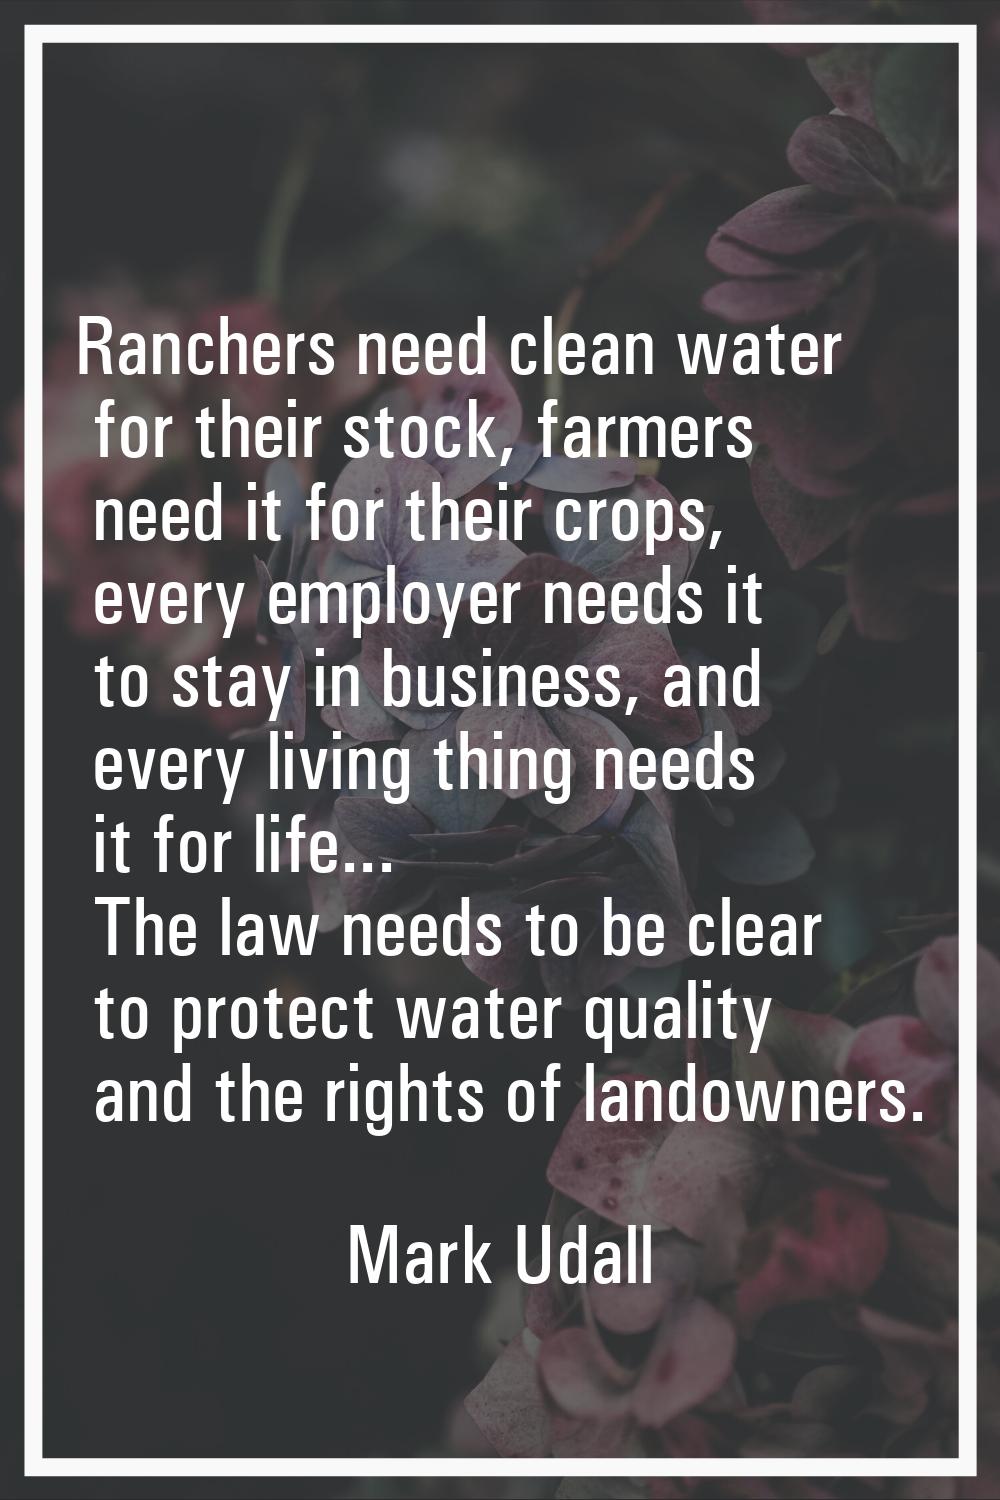 Ranchers need clean water for their stock, farmers need it for their crops, every employer needs it